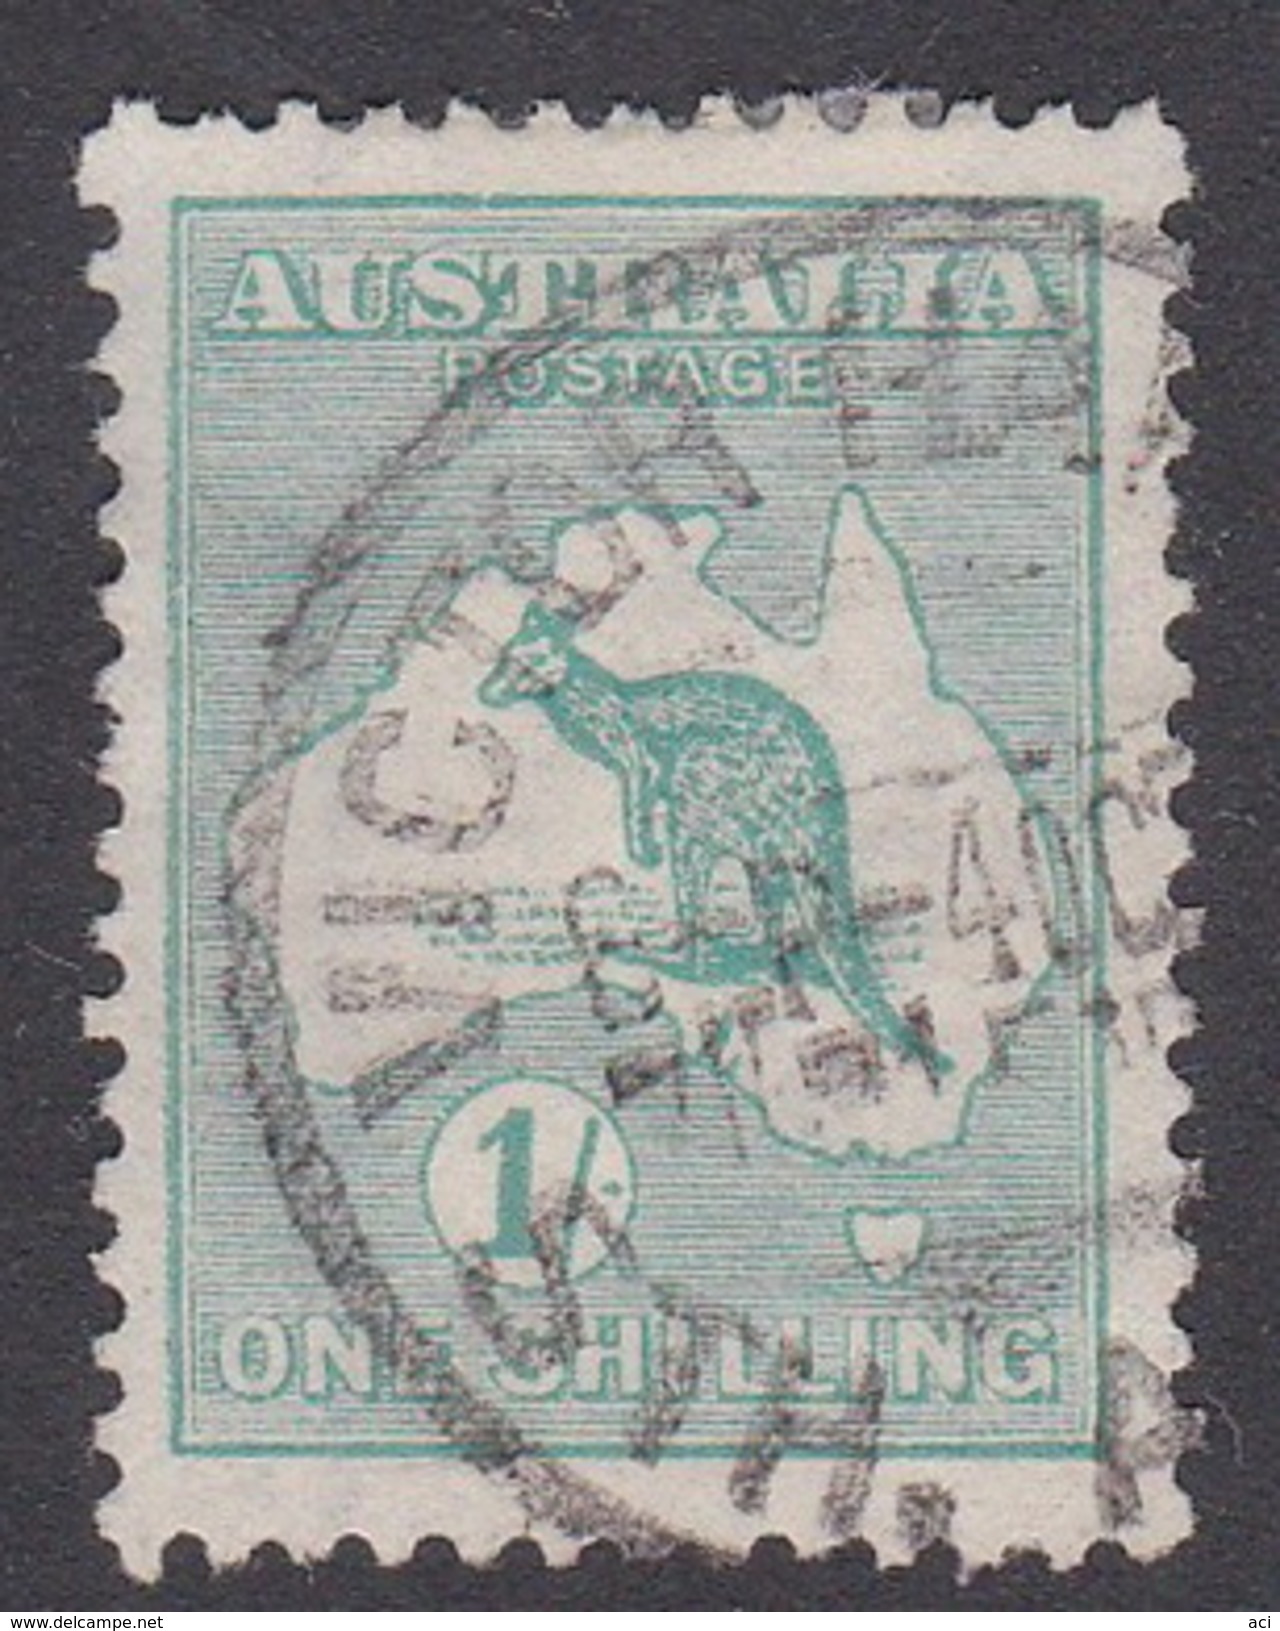 Australia SG 11 1913 First Watermark Kangaroo, One Shilling Emerald Used - Used Stamps